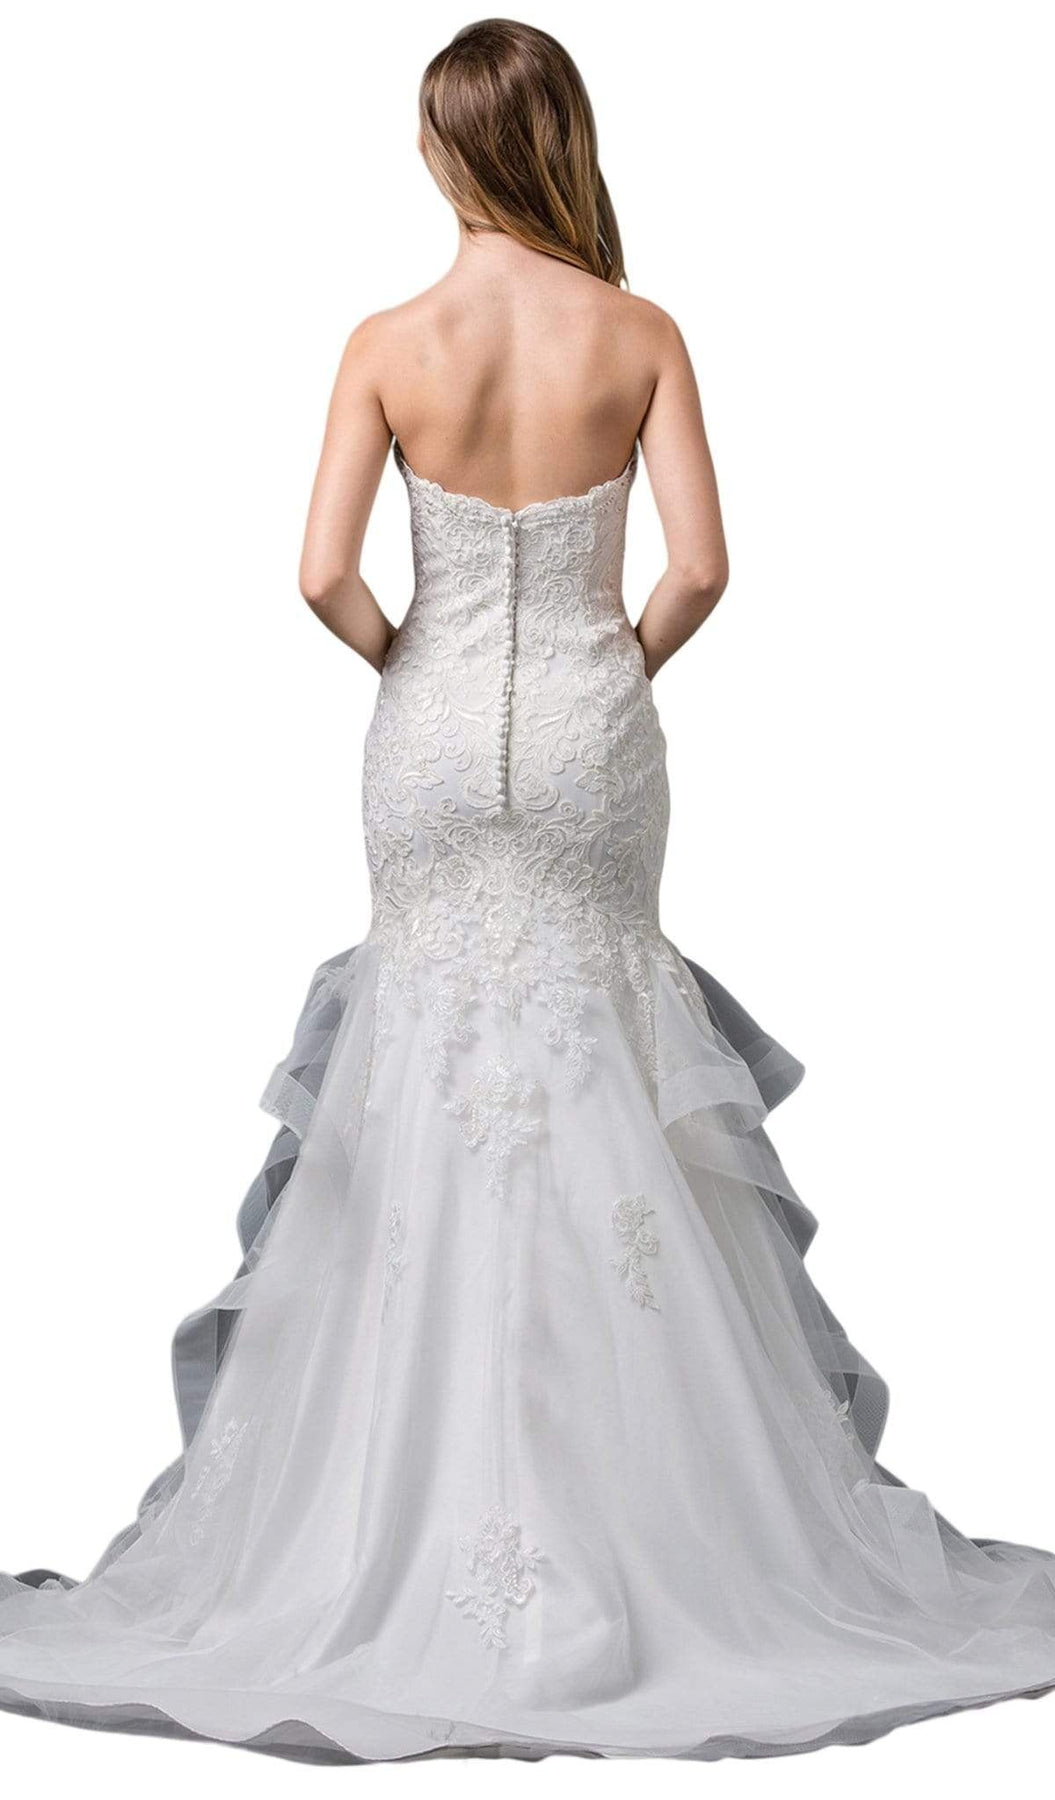 Dancing Queen Bridal - 83 Strapless Embroidered Sweetheart Mermaid Gown Special Occasion Dress